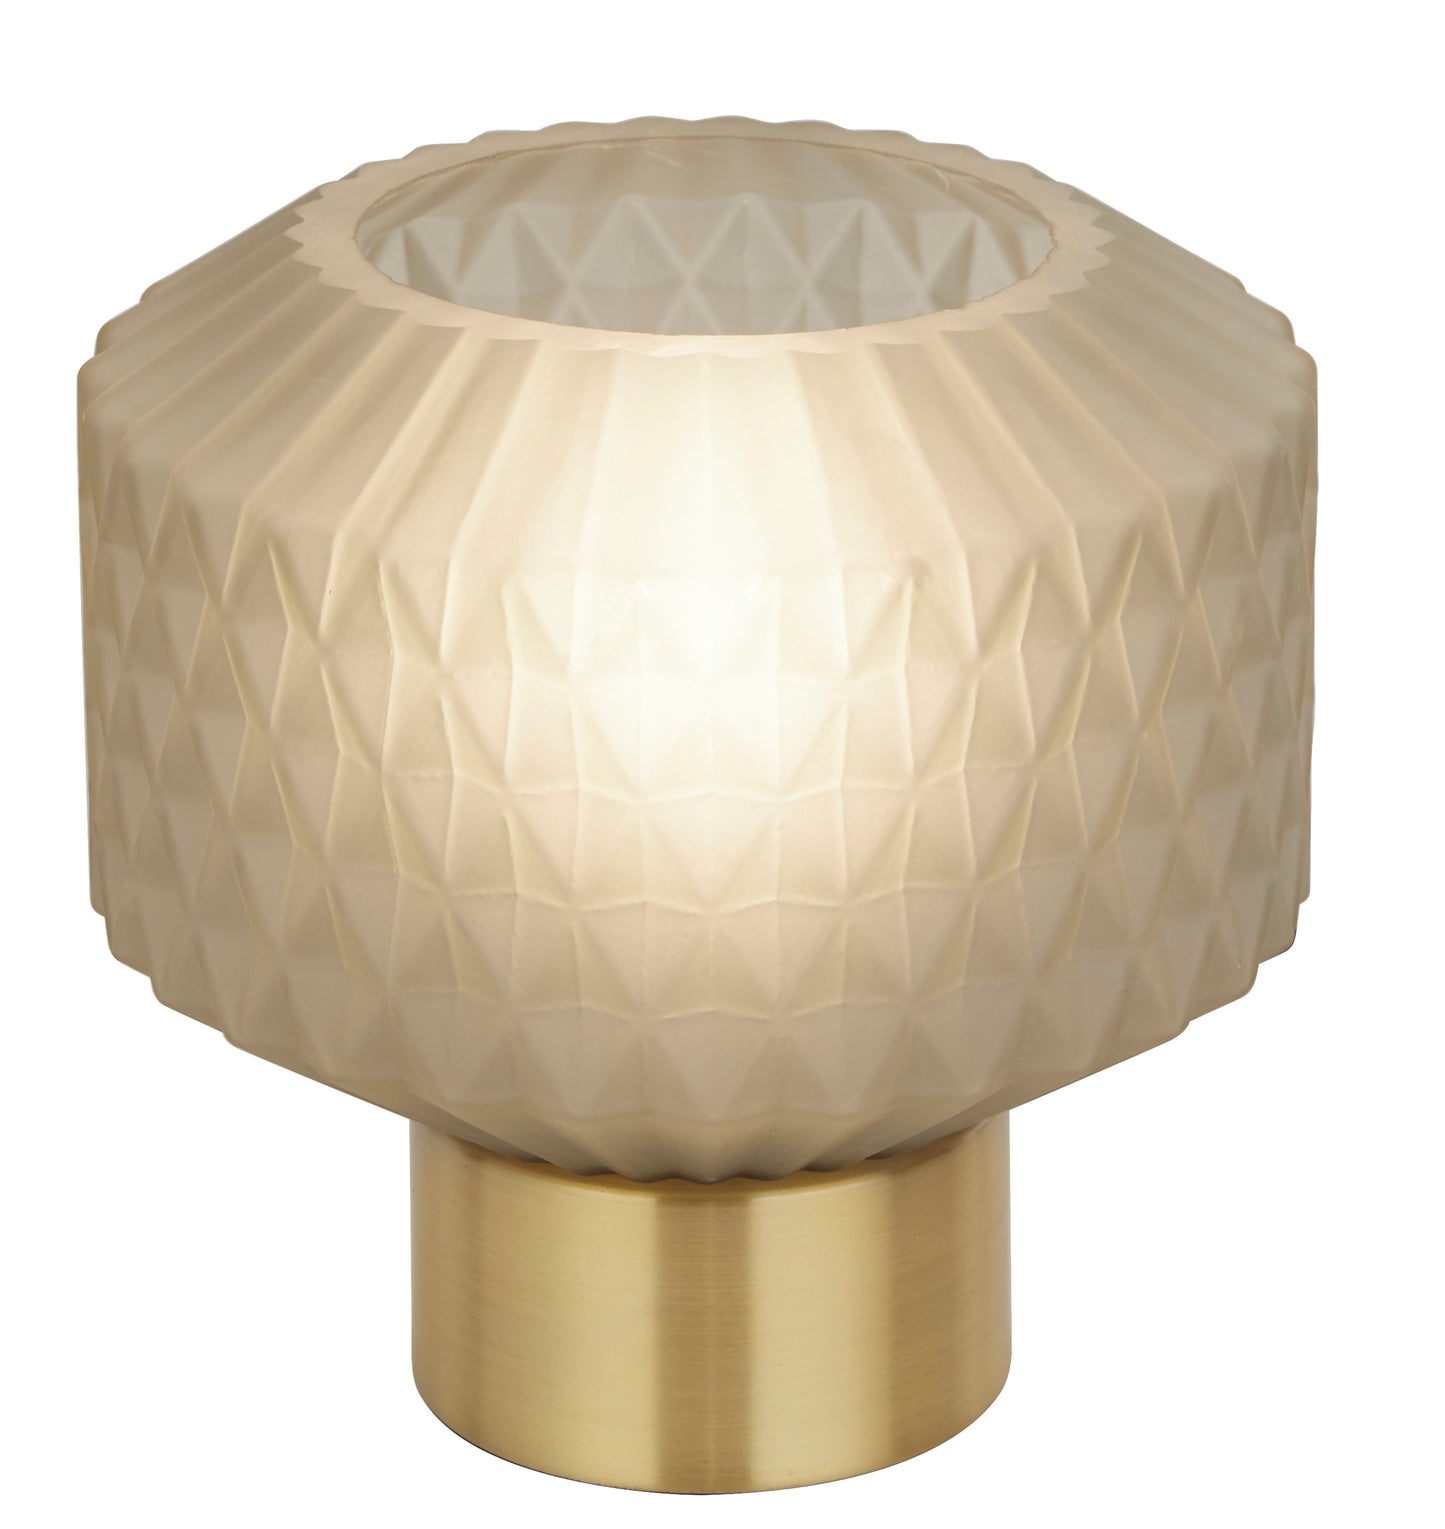 CGC PEARL Frosted Champagne and Satin Gold Table Lamp